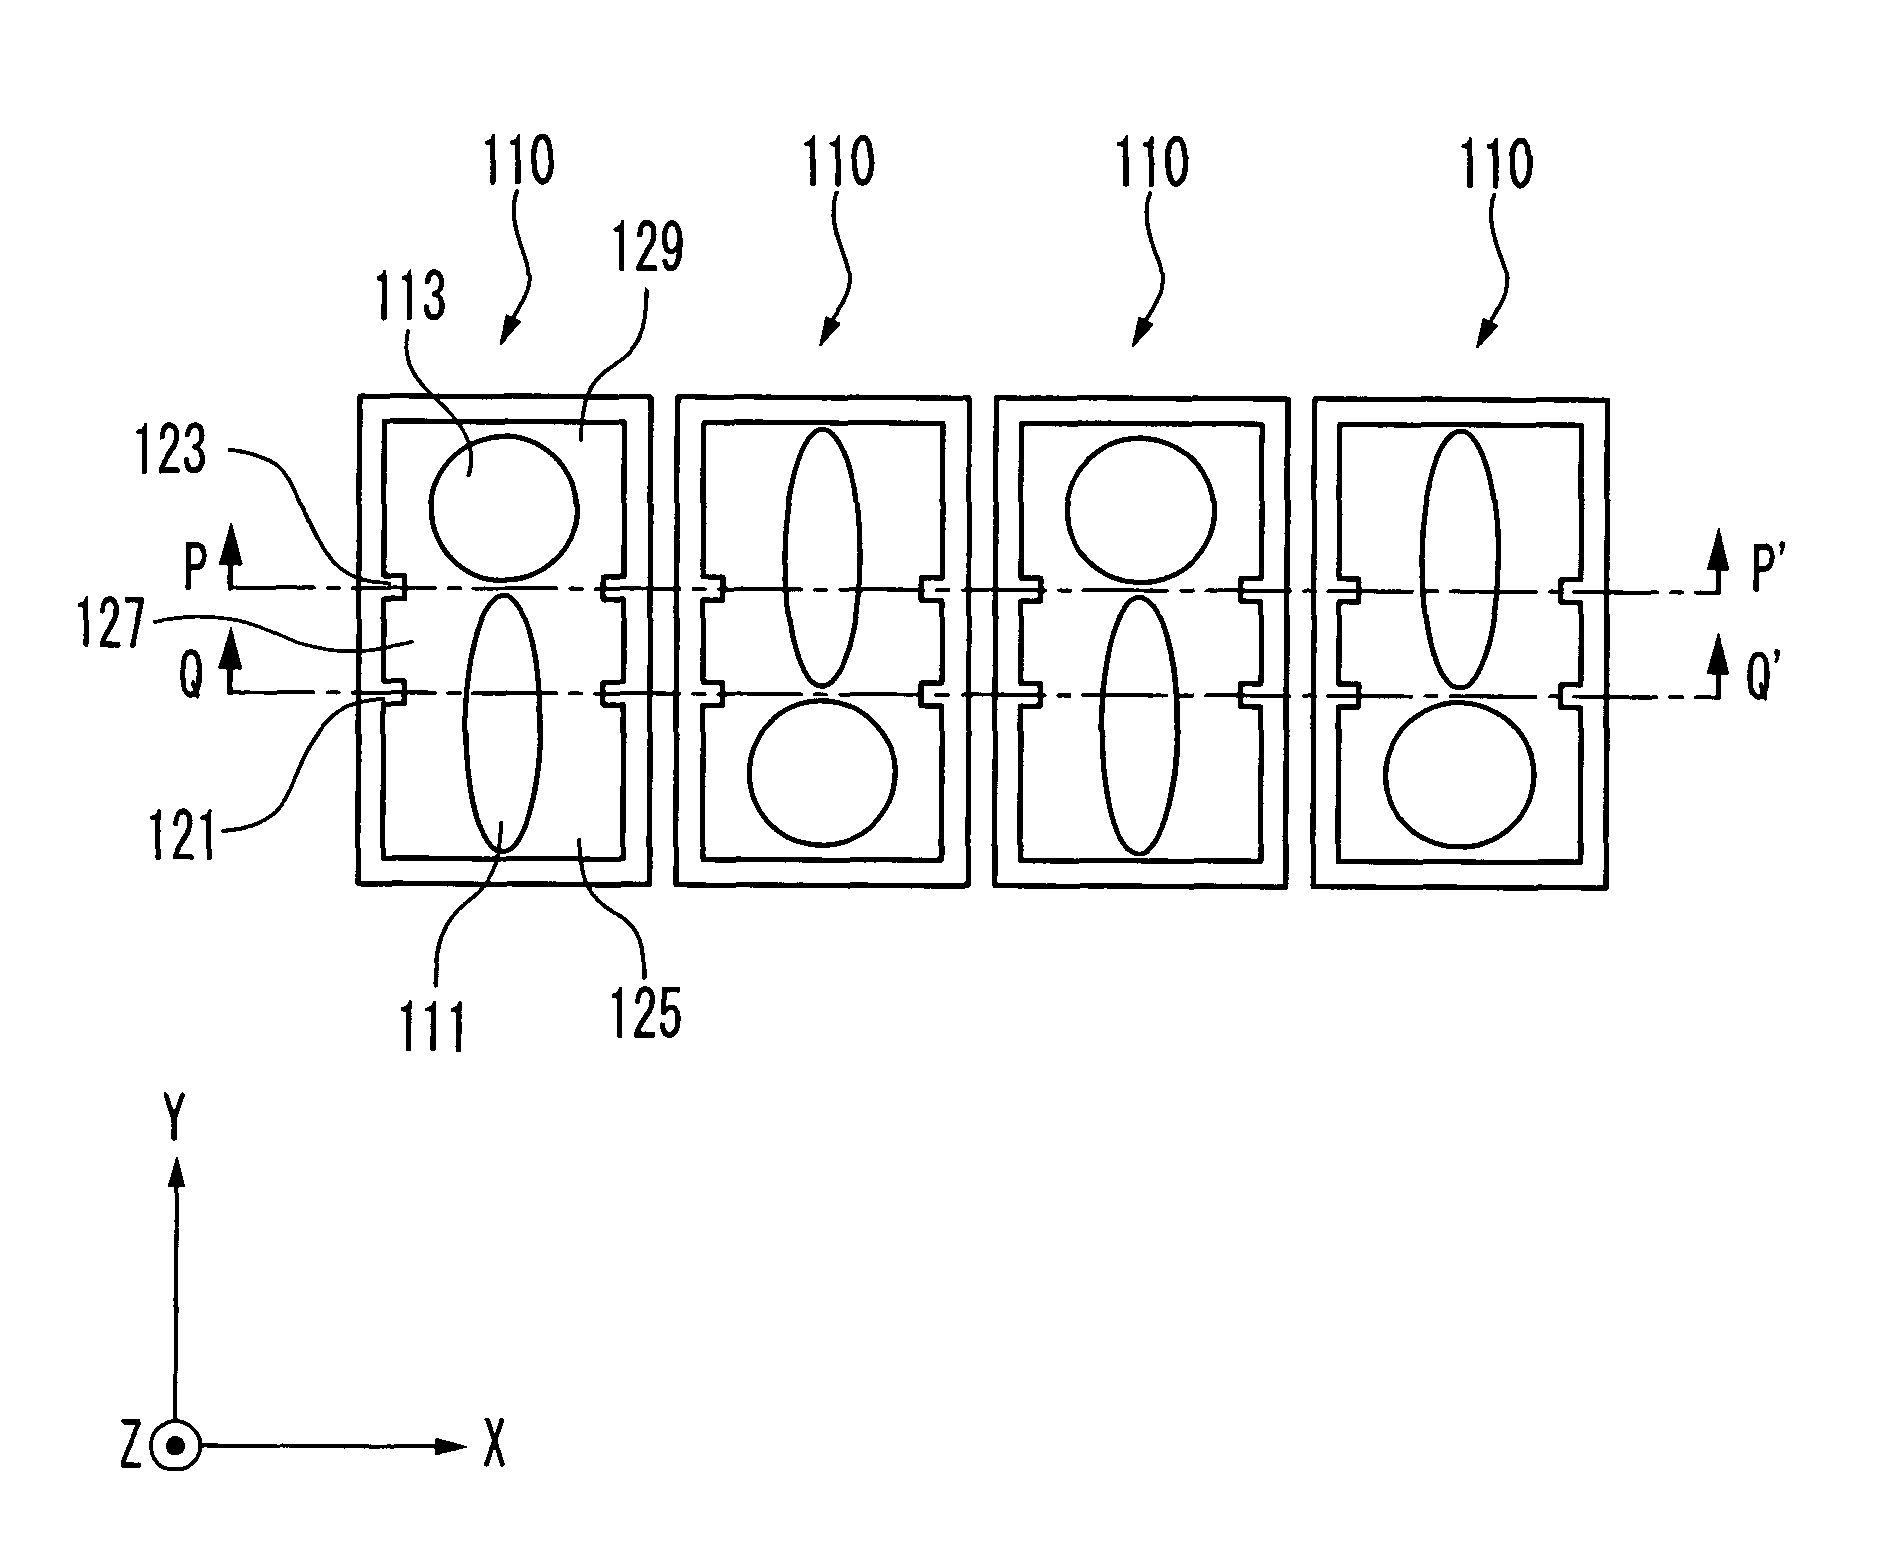 Semiconductor device with multiple designation marks